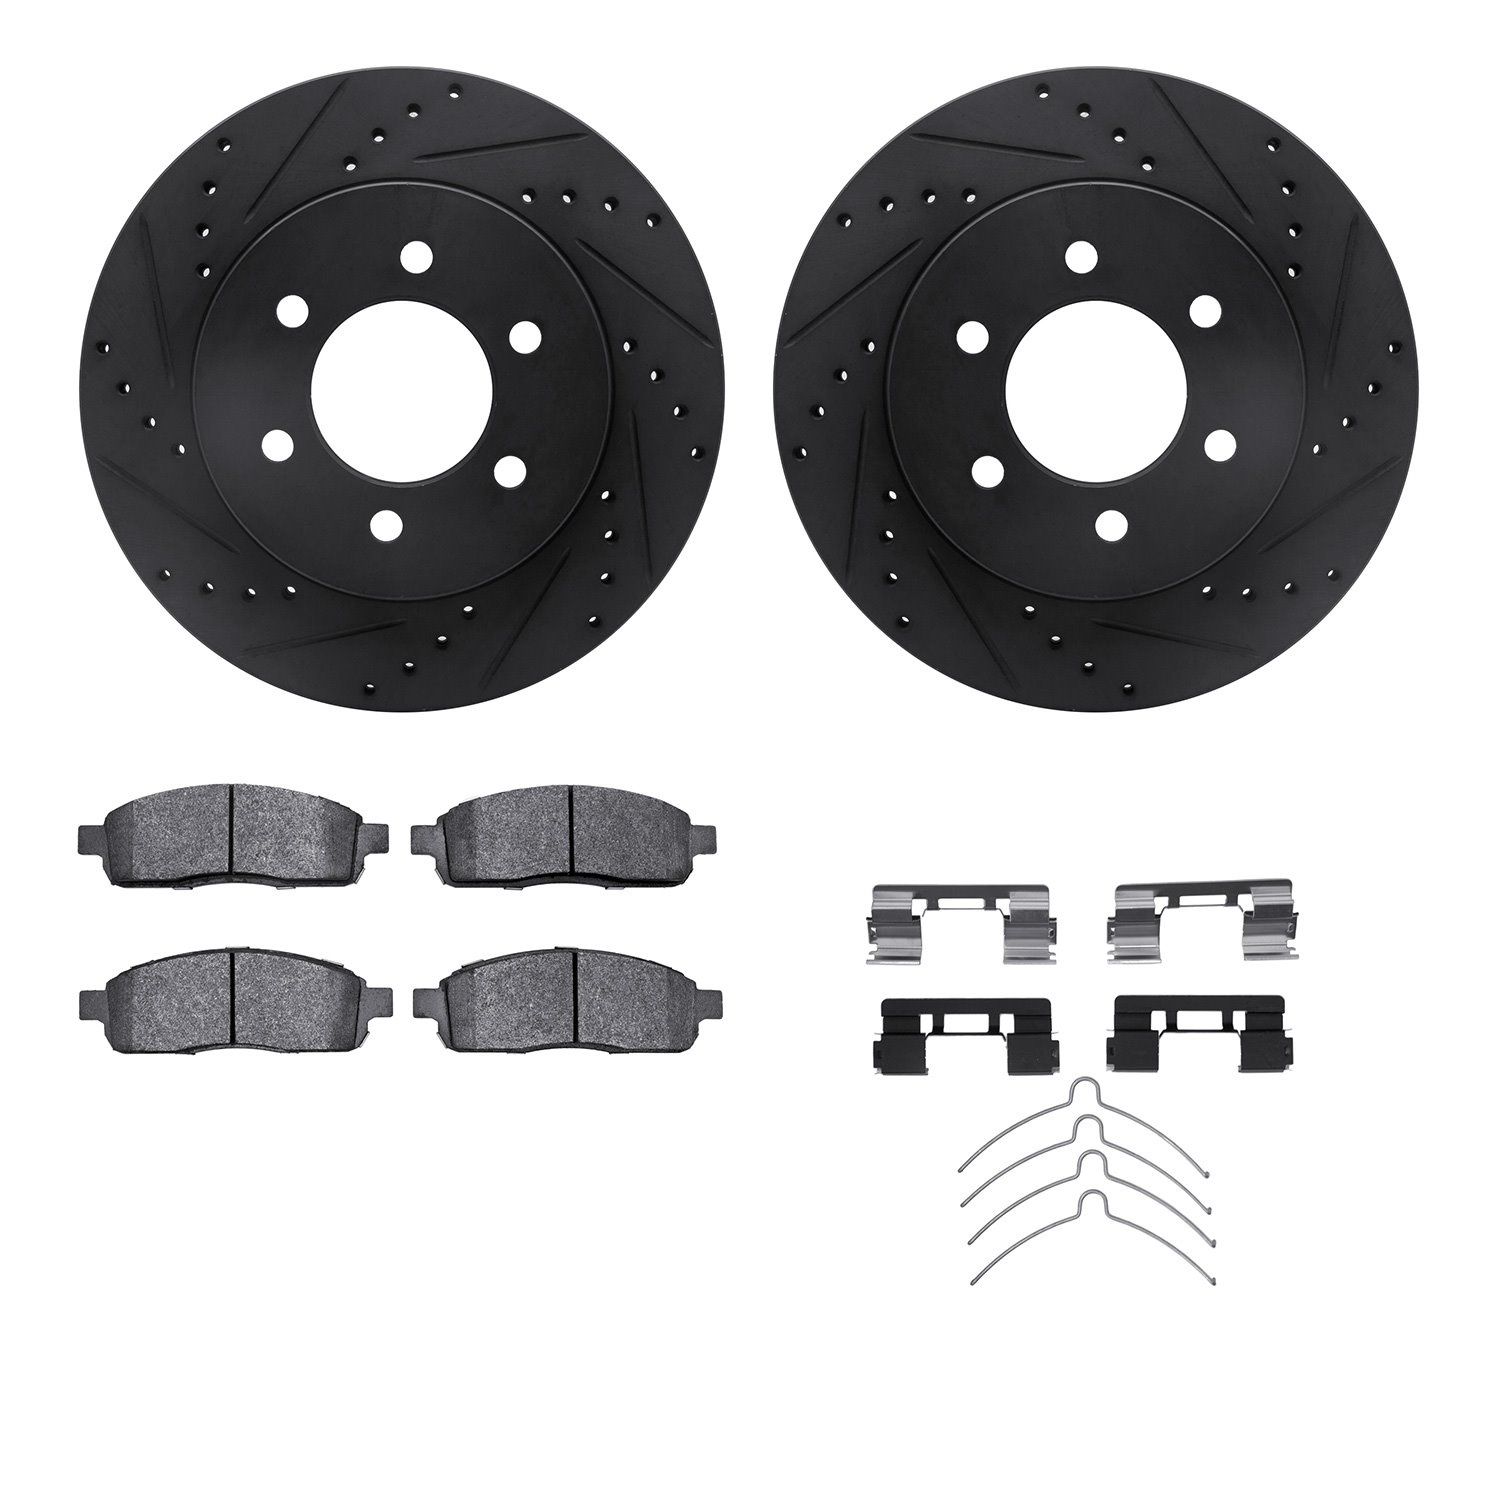 8412-54073 Drilled/Slotted Brake Rotors with Ultimate-Duty Brake Pads Kit & Hardware [Black], 2004-2008 Ford/Lincoln/Mercury/Maz